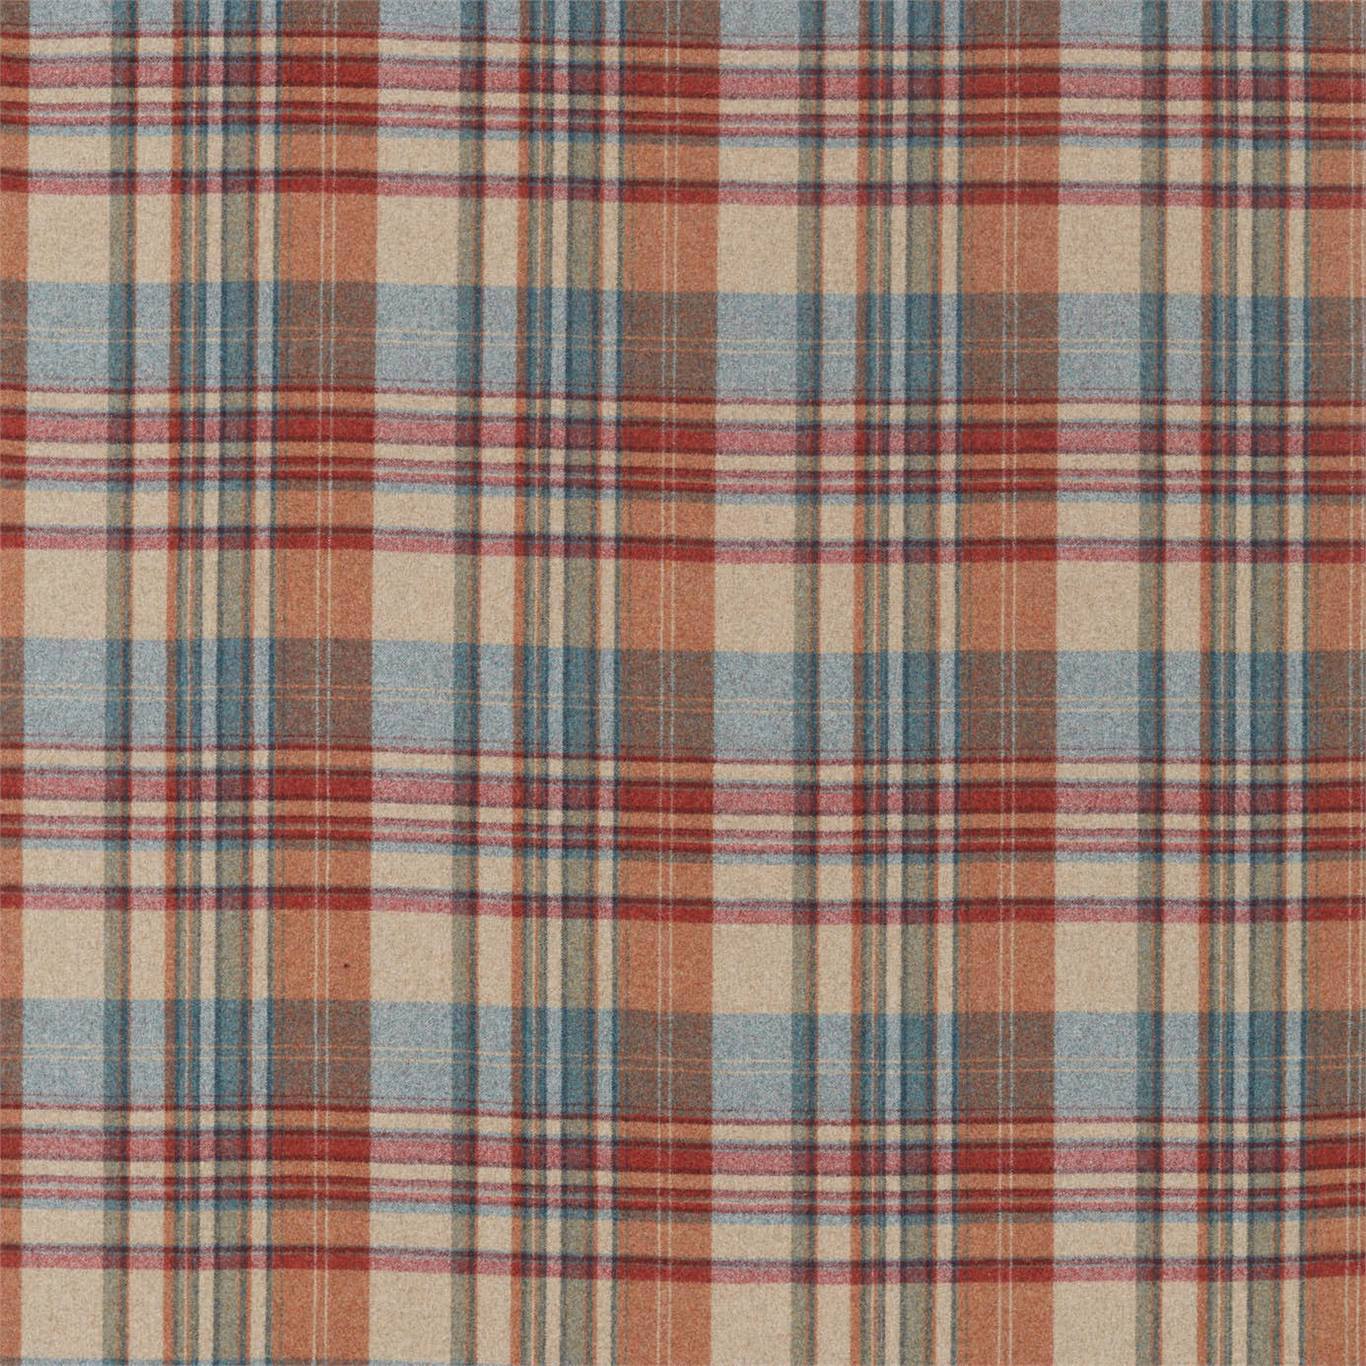 Bryndle Check Russet/Amber Fabric by SAN